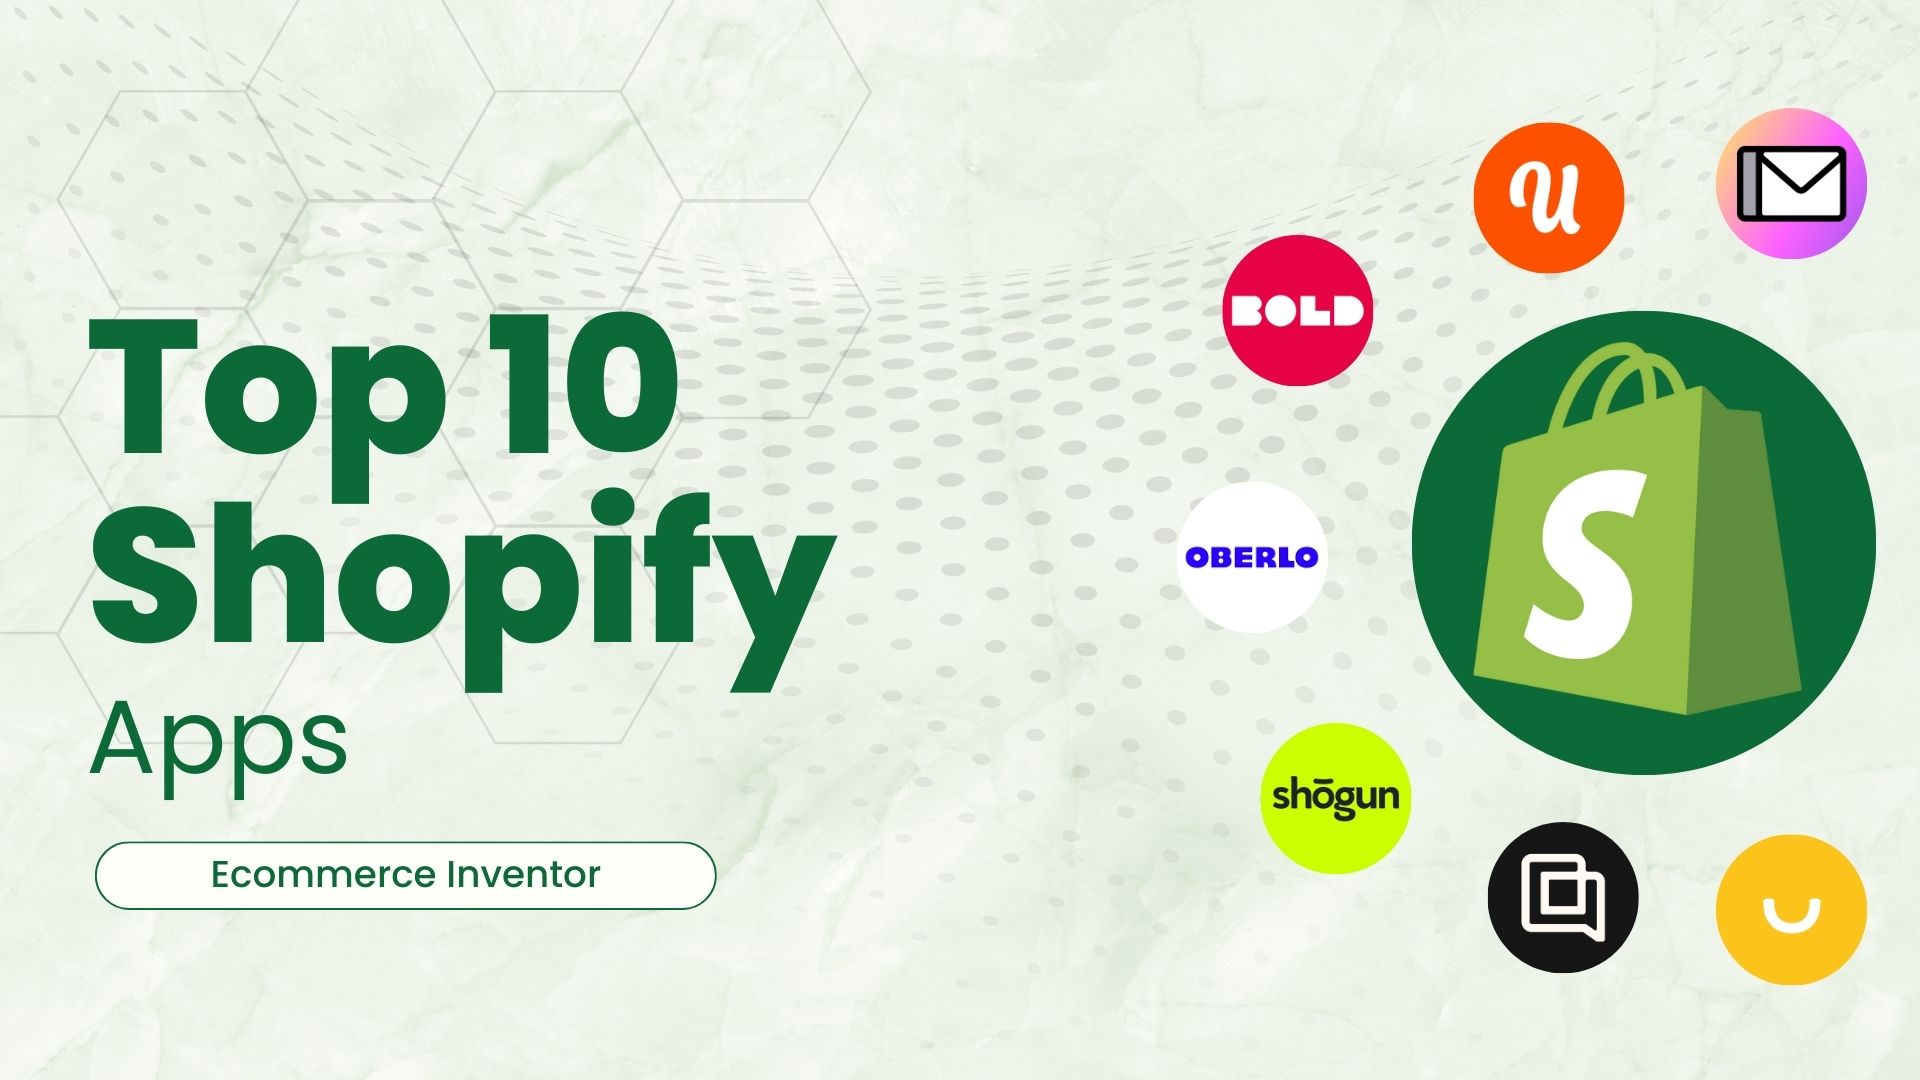 Top 10 shopify apps